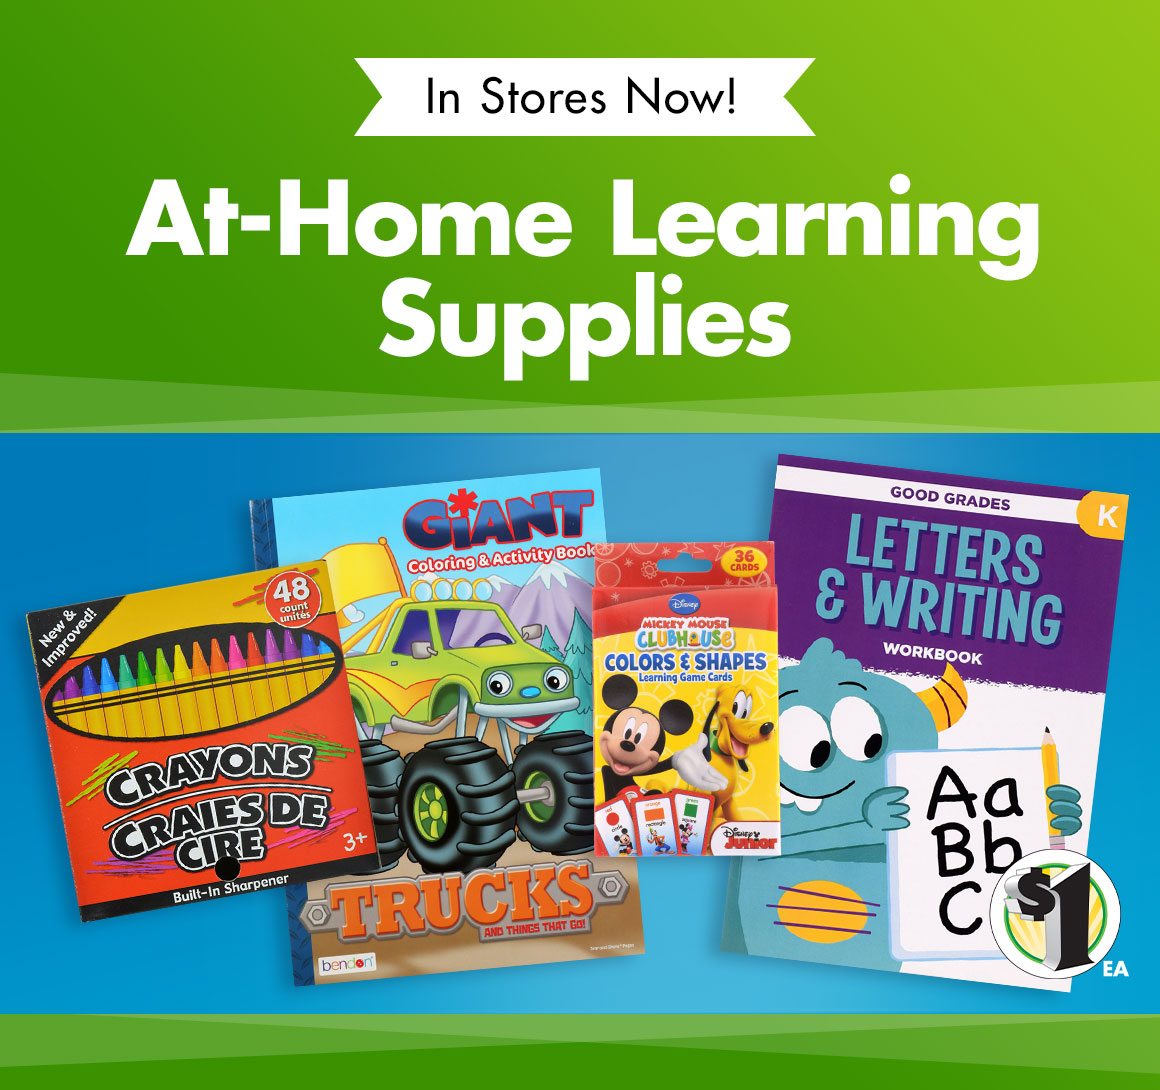 Shop $1 Home Learning Supplies!